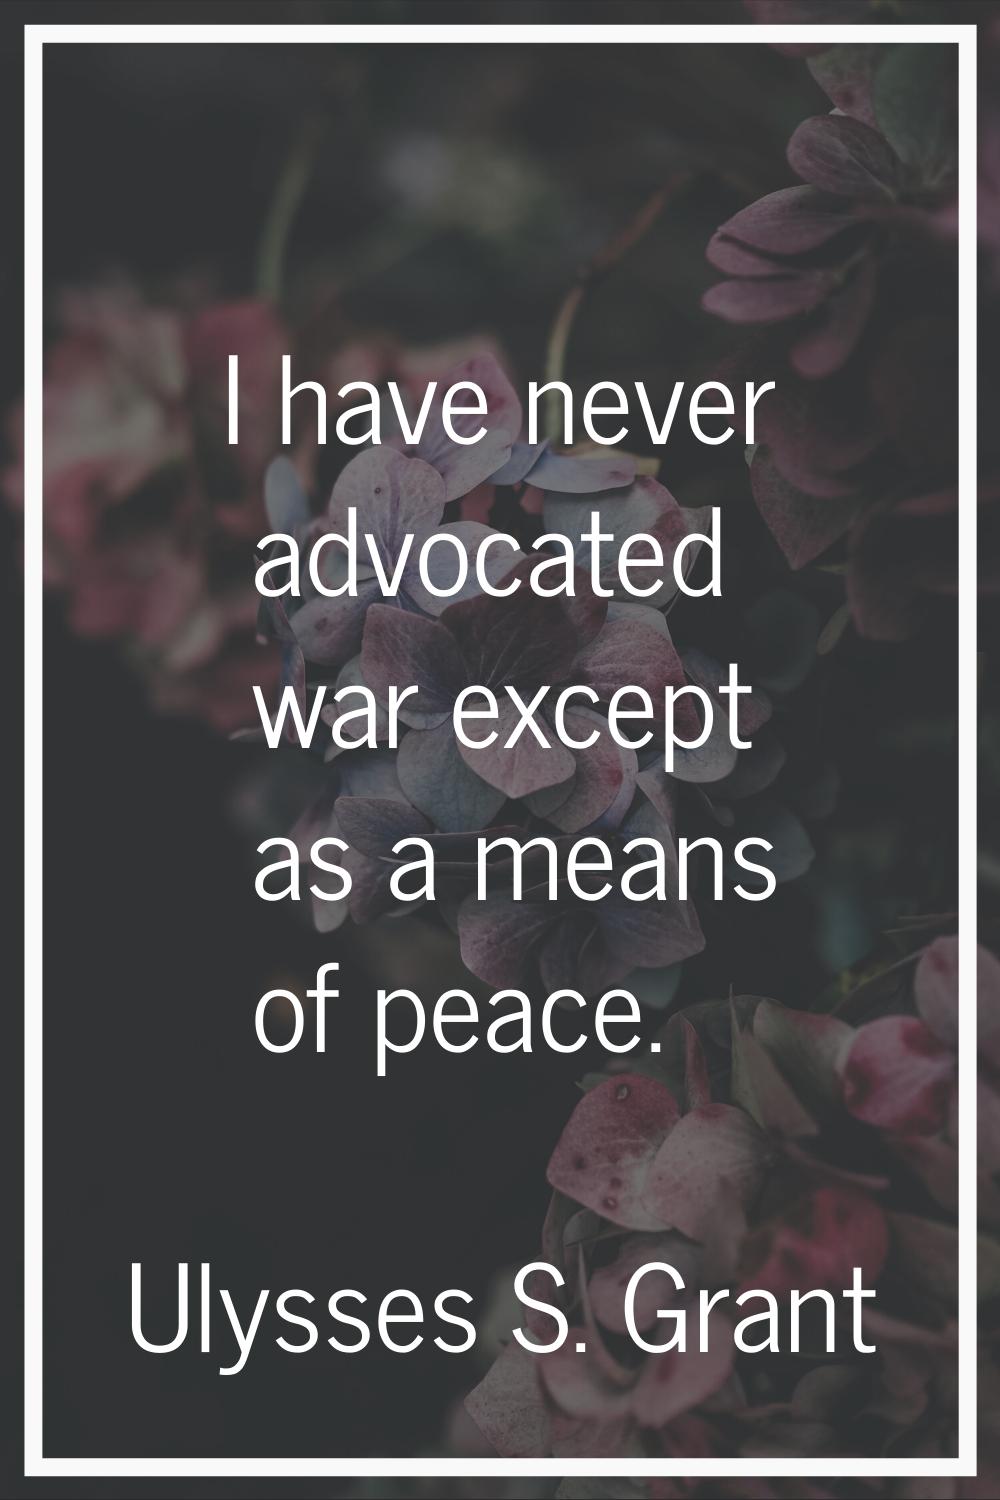 I have never advocated war except as a means of peace.